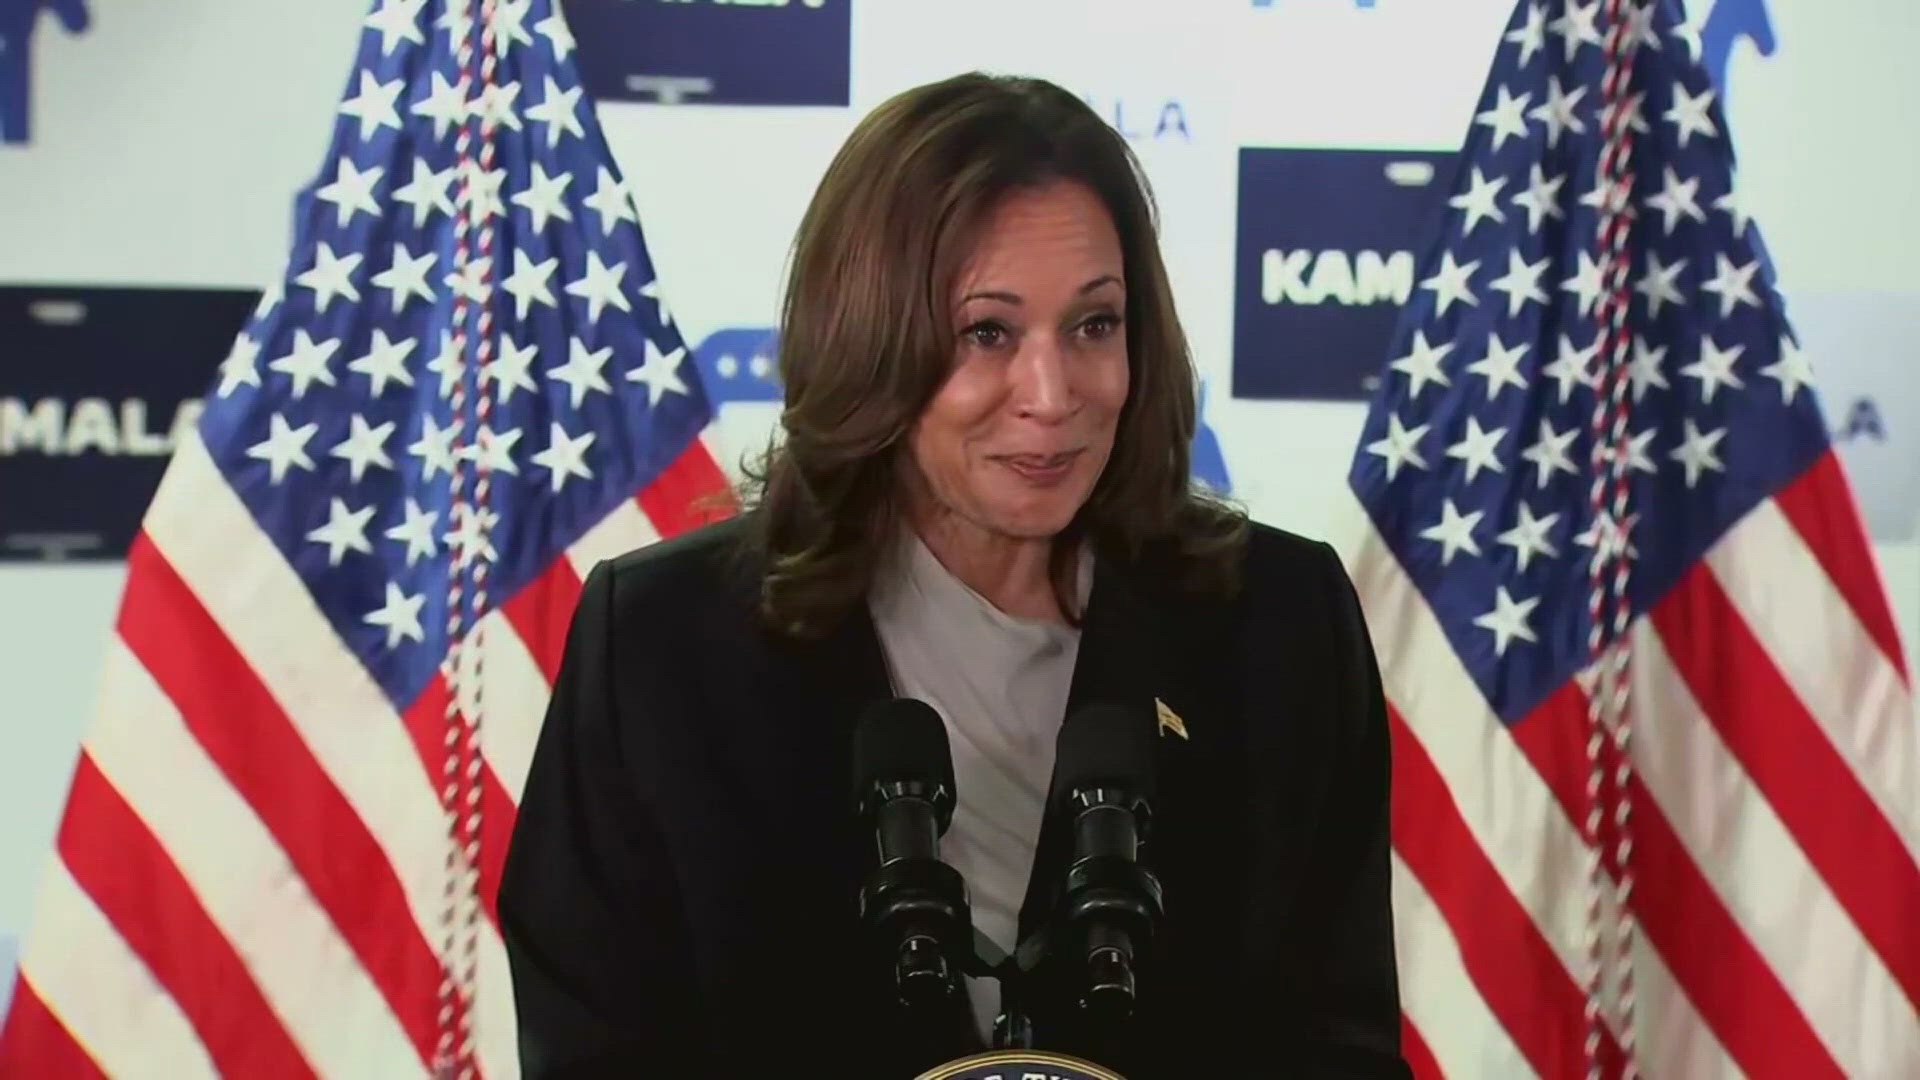 Kamala Harris Secures Sufficient Democratic Delegates for US Presidential Nomination